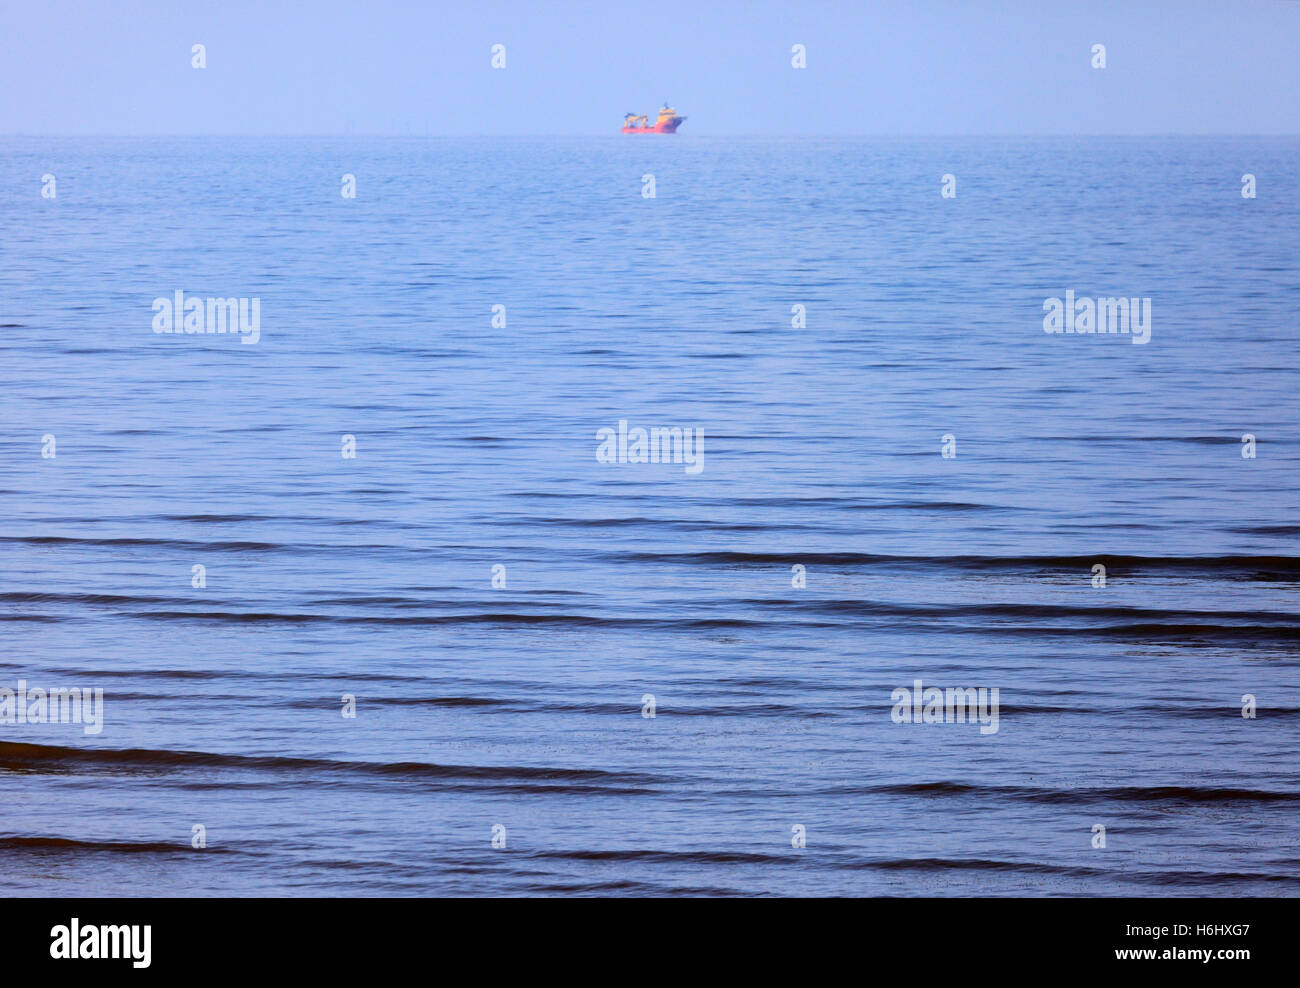 A solitary red boat on the blue sea. Stock Photo